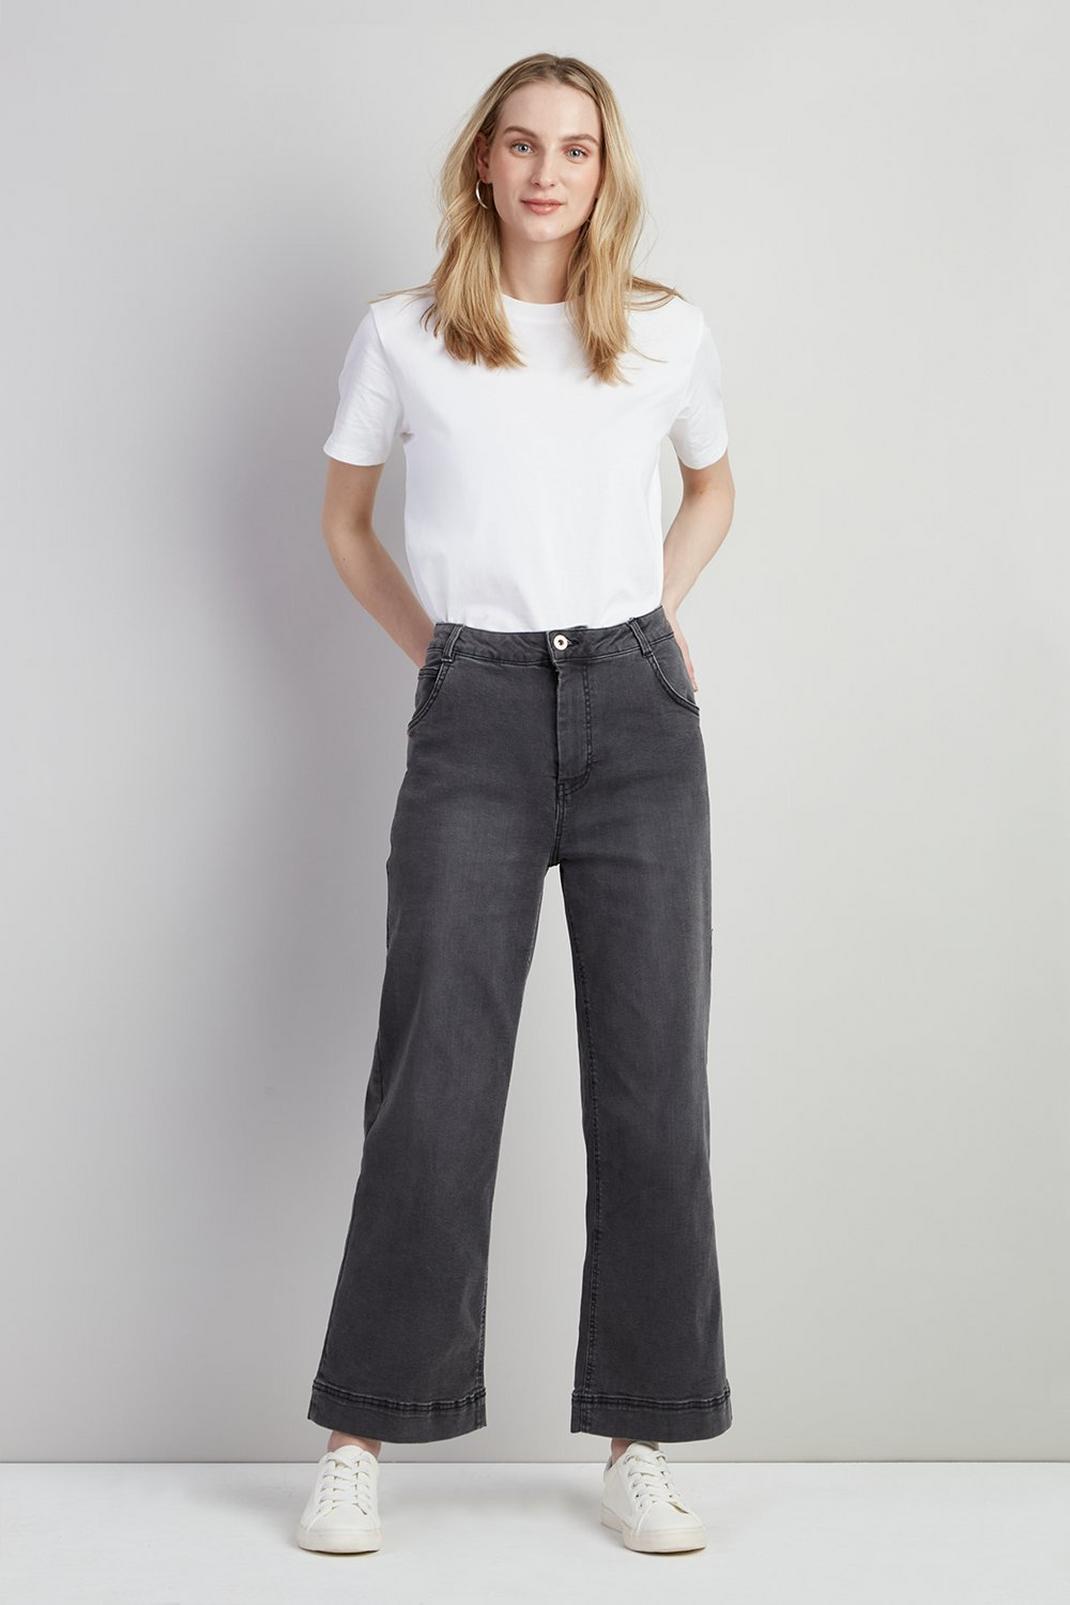 Grey Tall Heather Crop Wide Leg Jean image number 1